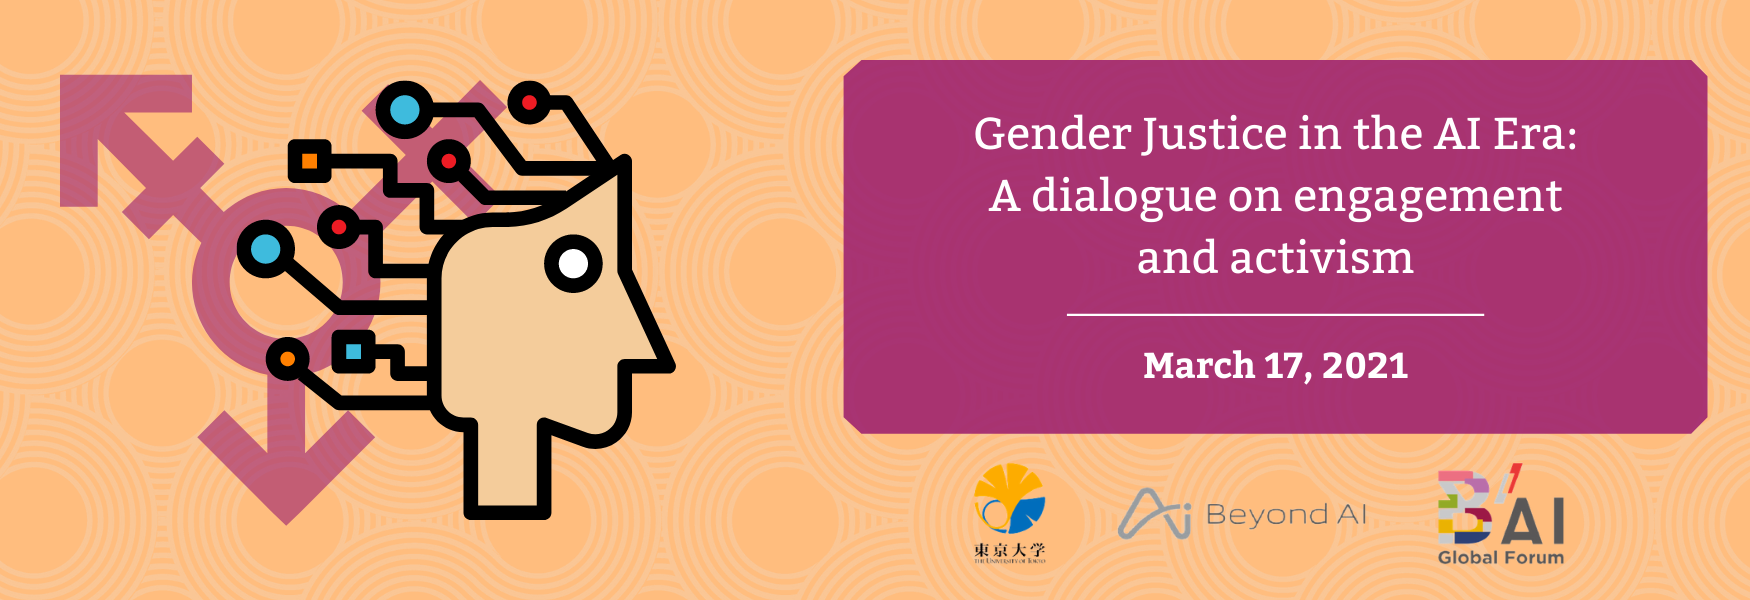 Gender Justice in the AI Era: A dialogue on engagement and activism